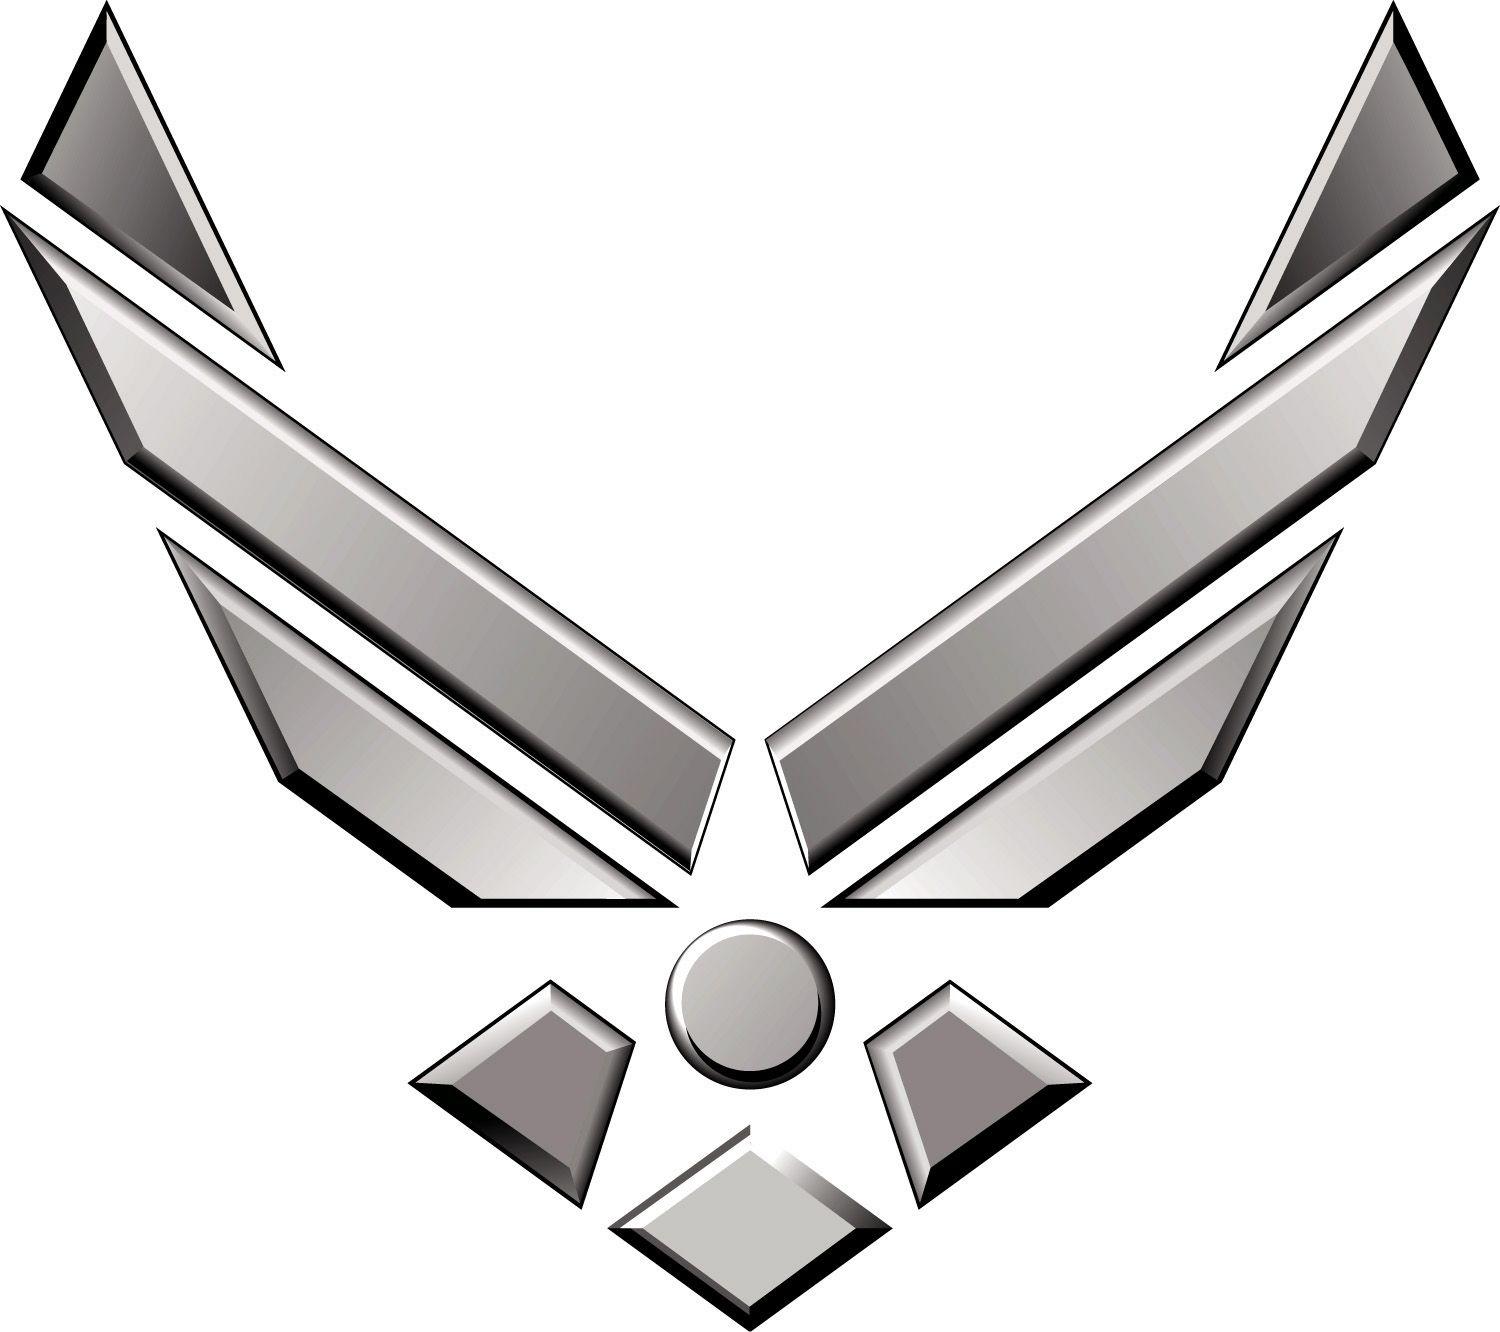 3D Air Force Logo - File:USAF wings (icon).jpg